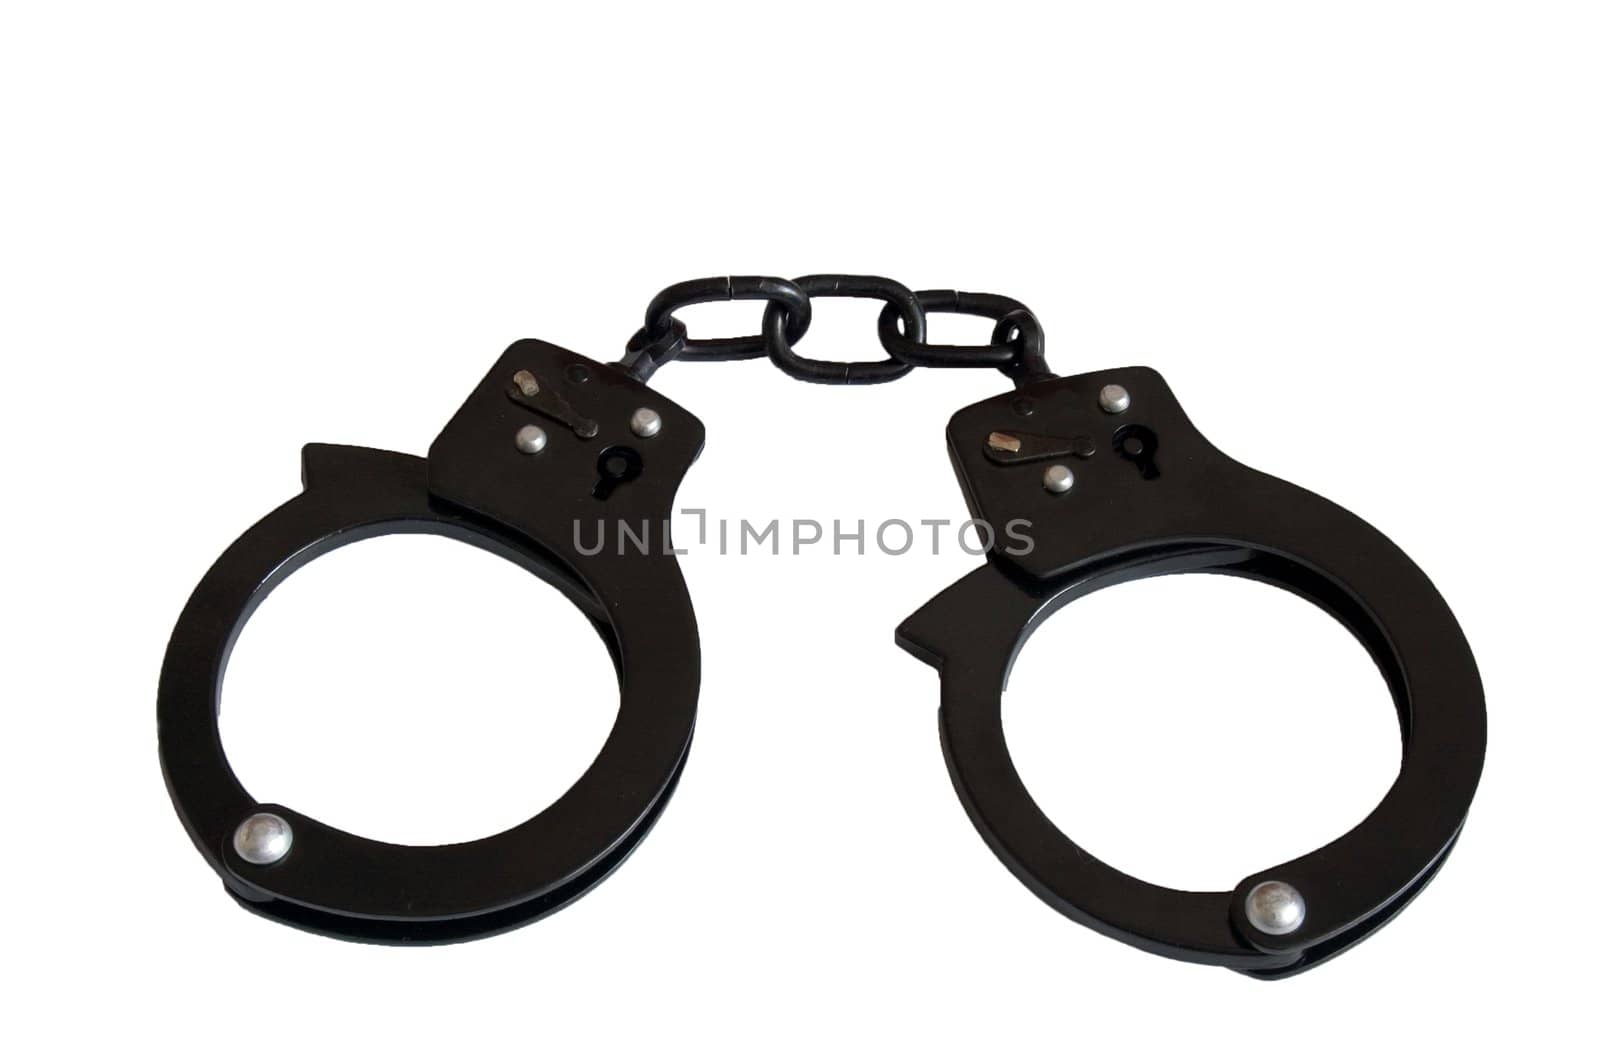 black handcuffs isolated on white